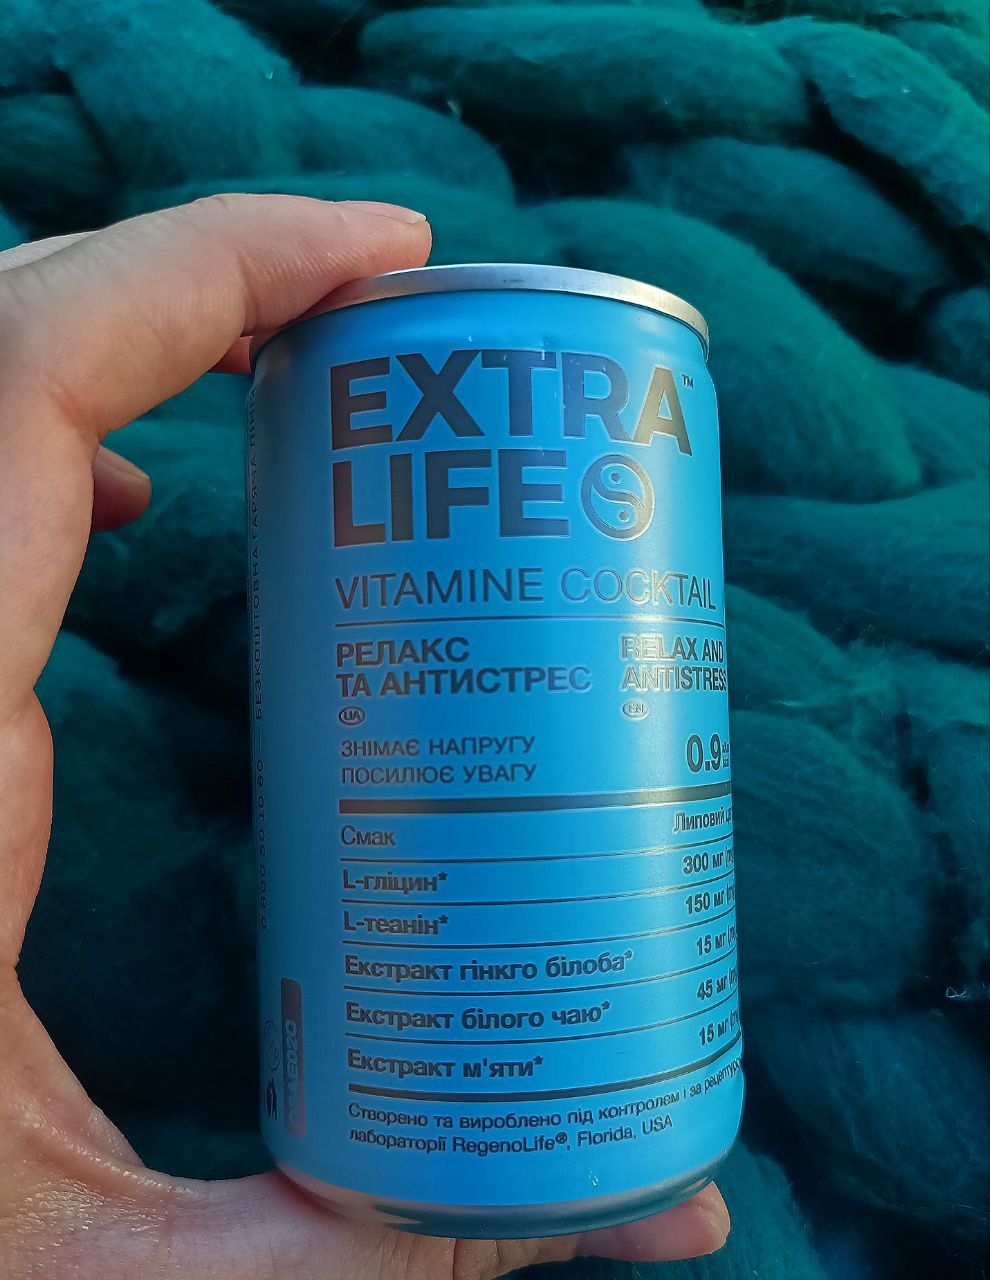 EXTRA LIFE RELAX AND ANTISTRESS